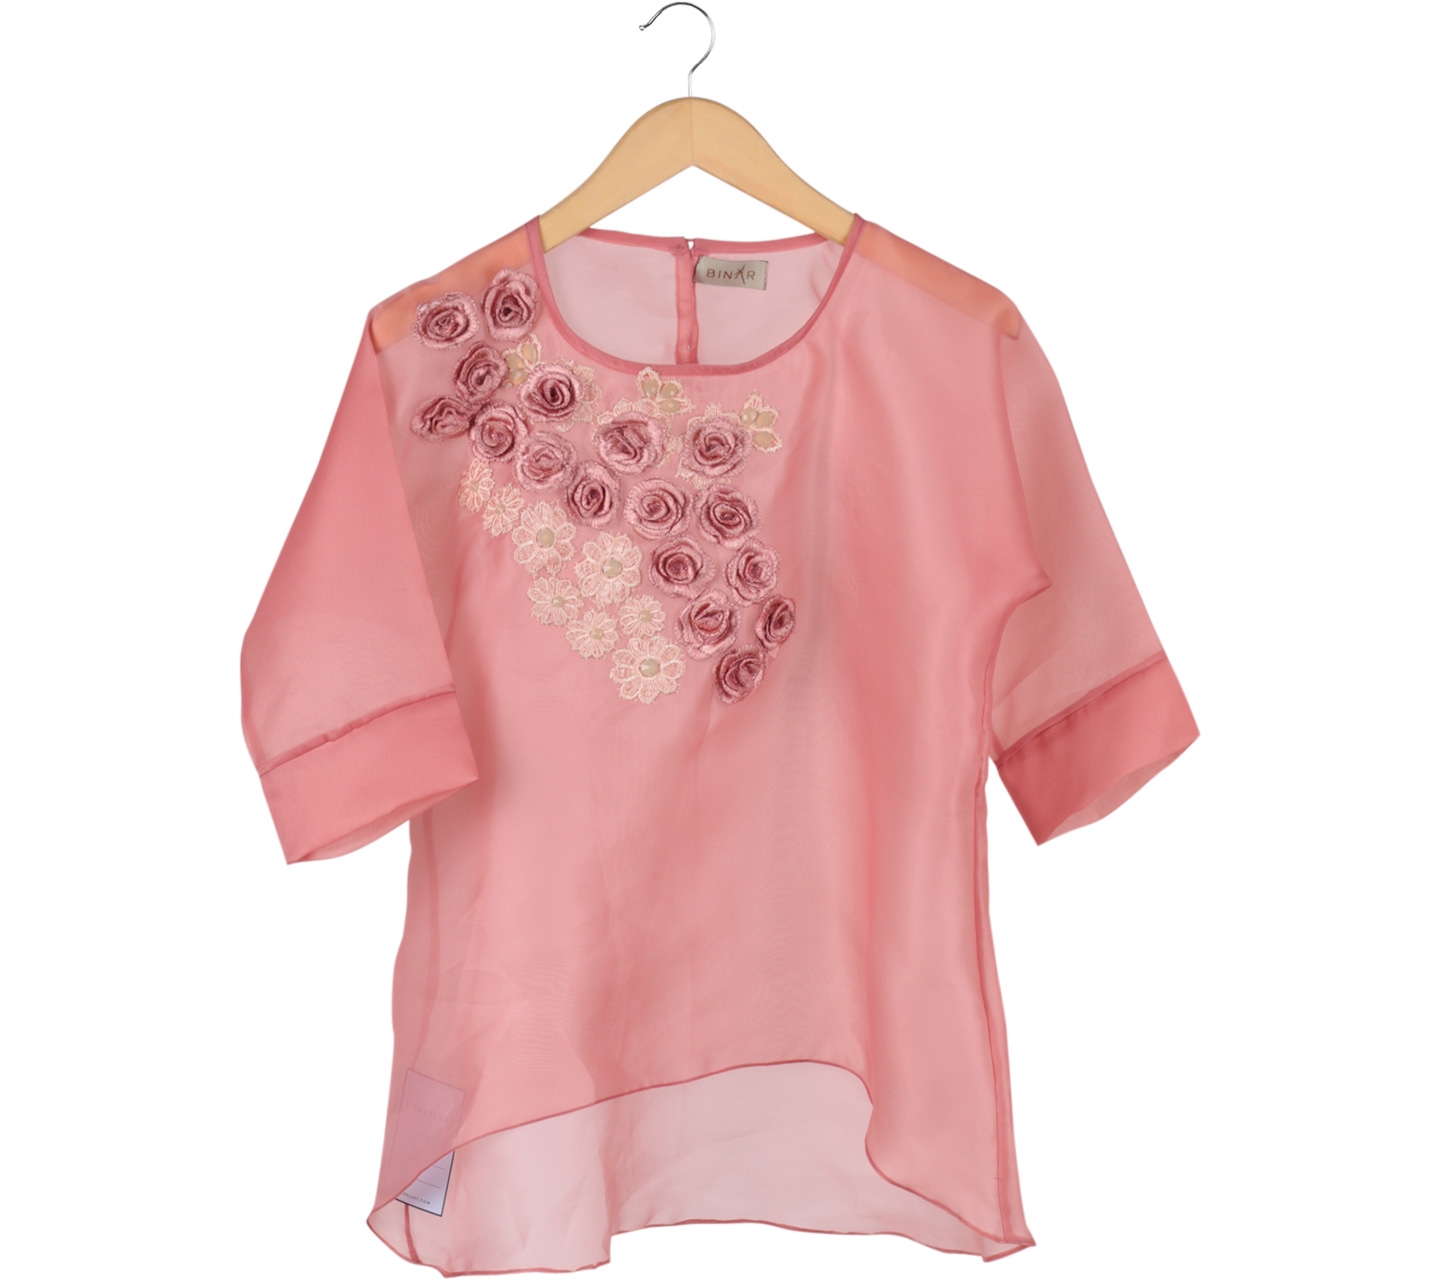 Binar Pink Floral Embroidery Blouse